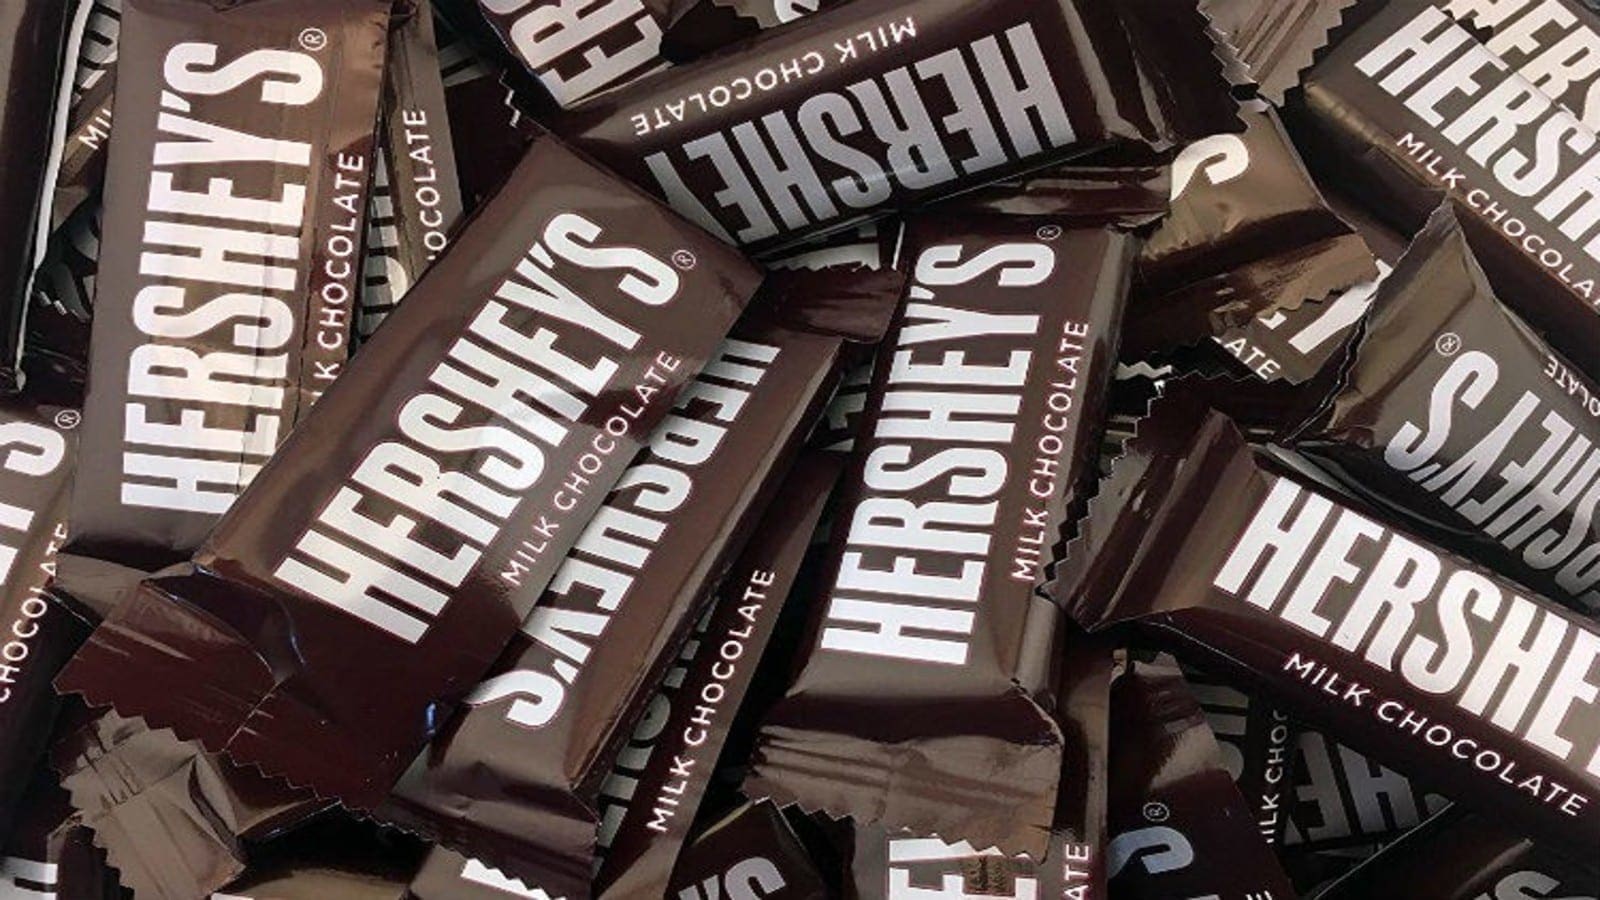 Hershey targets unsustainable plastic packaging in new 10-year sustainability plan